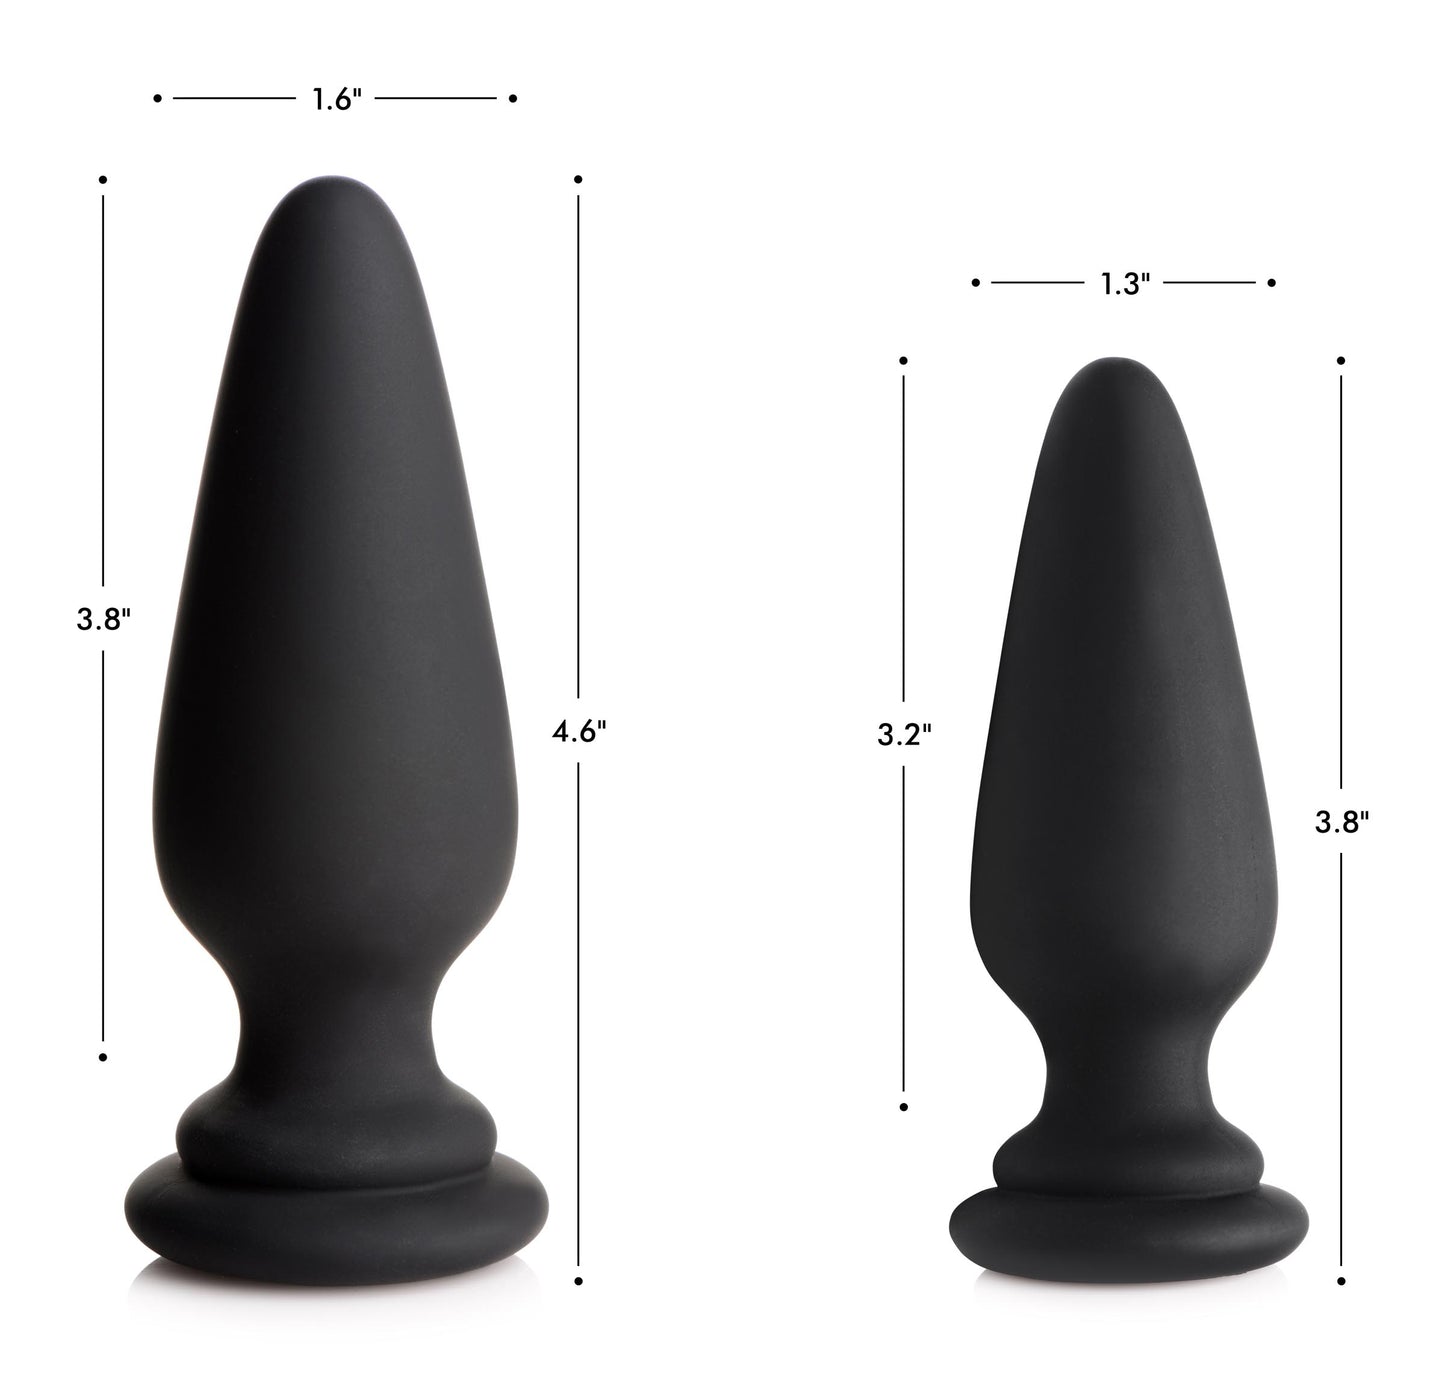 Large Anal Plug With Interchangeable Bunny Tail - Pink